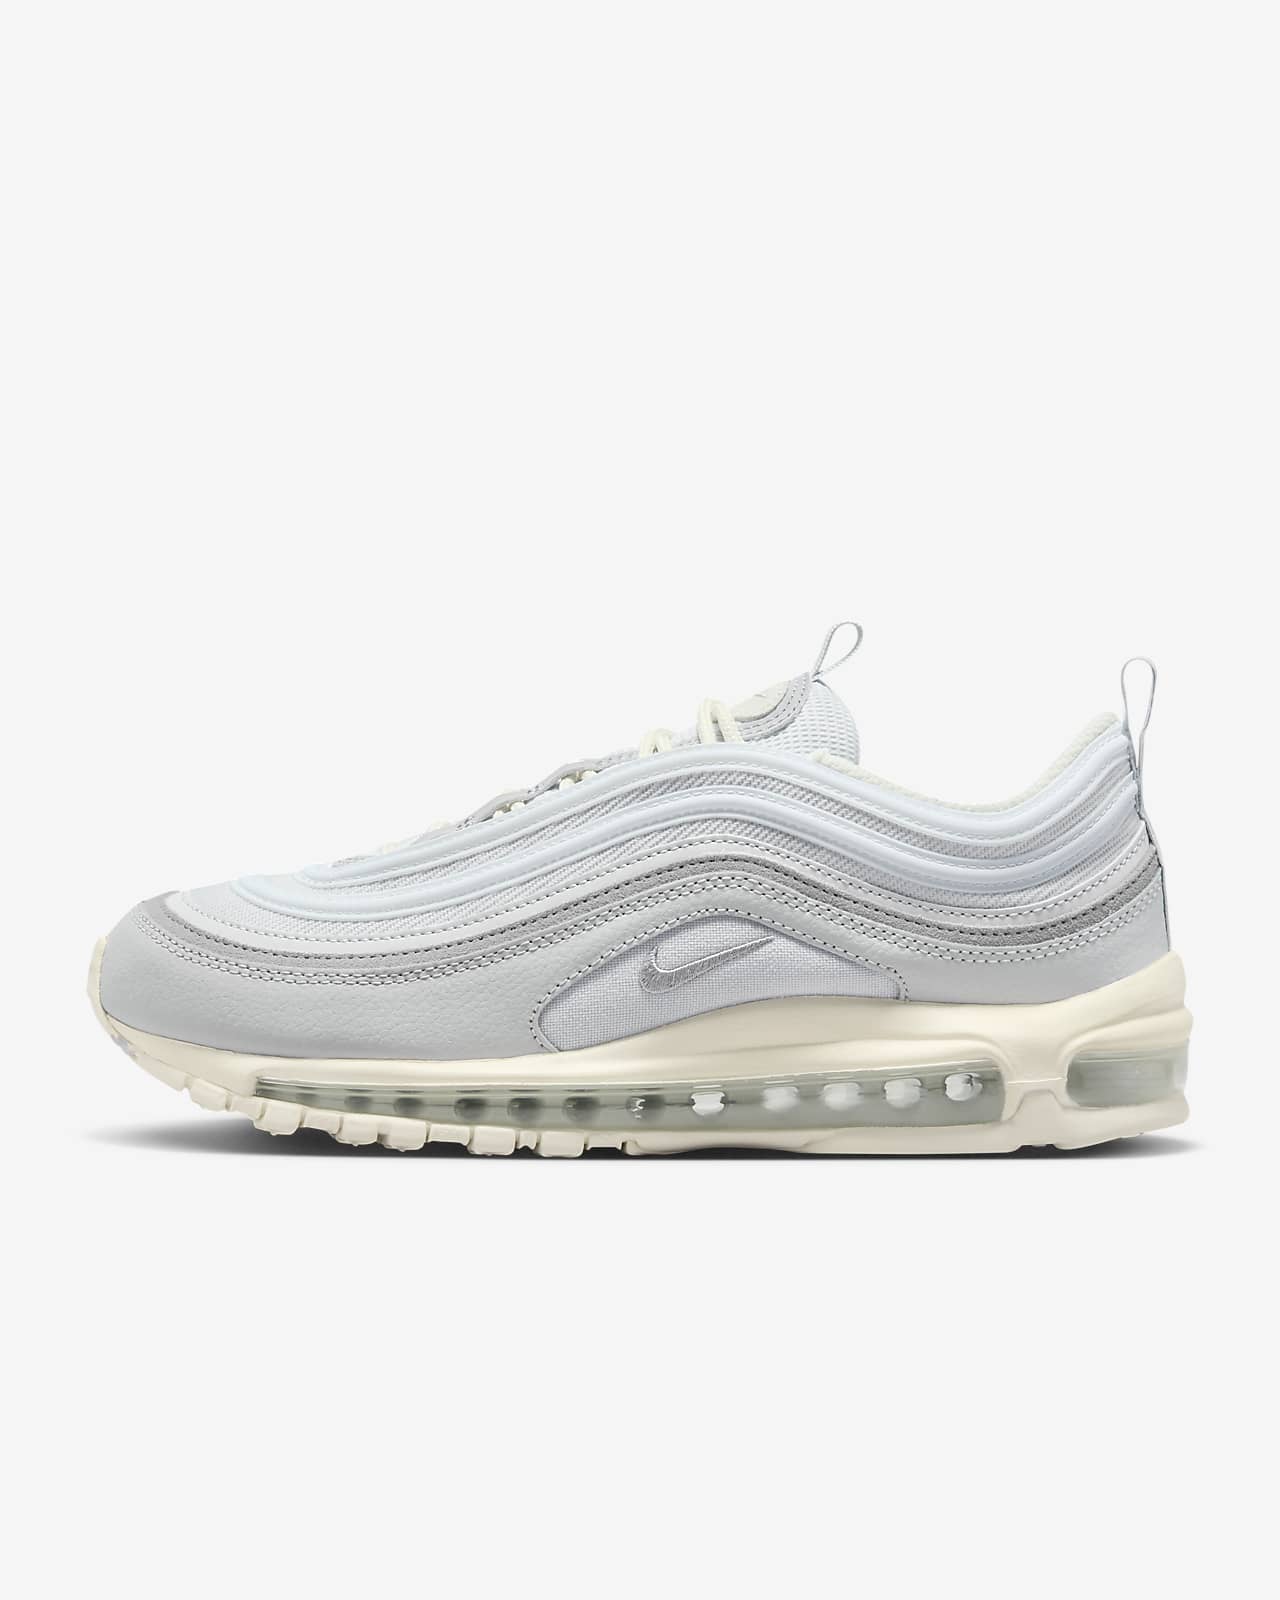 Nike Air Max 97 Review: The Sneaker That Will Change Your Life!